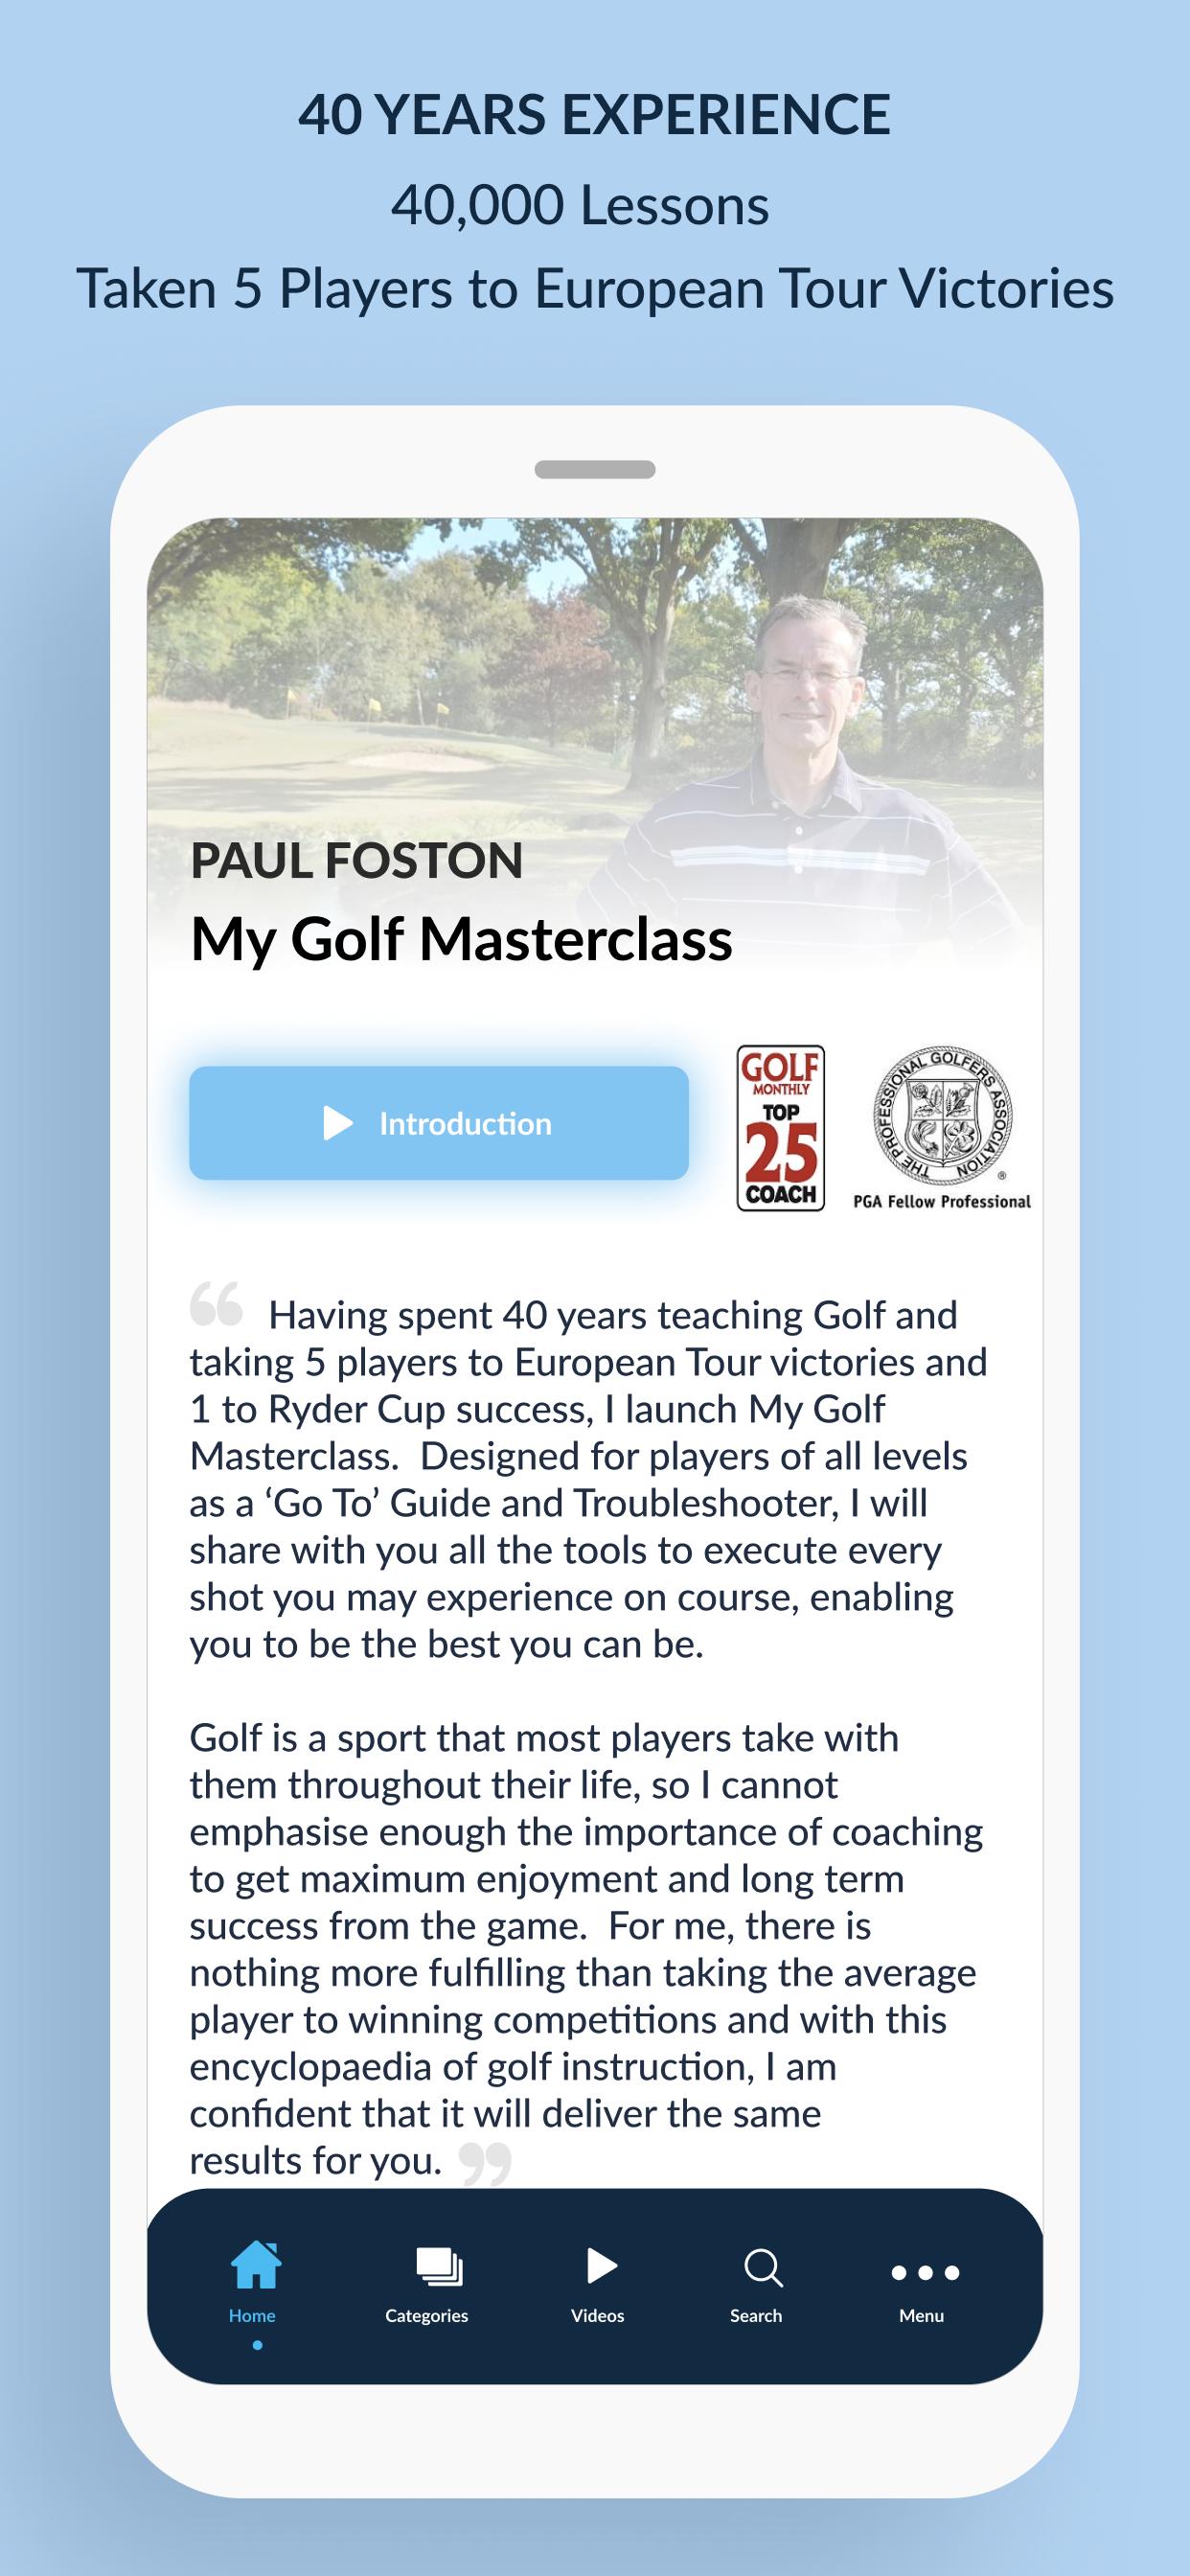 PAUL FOSTON - My Golf Masterclass for Android - APK Download